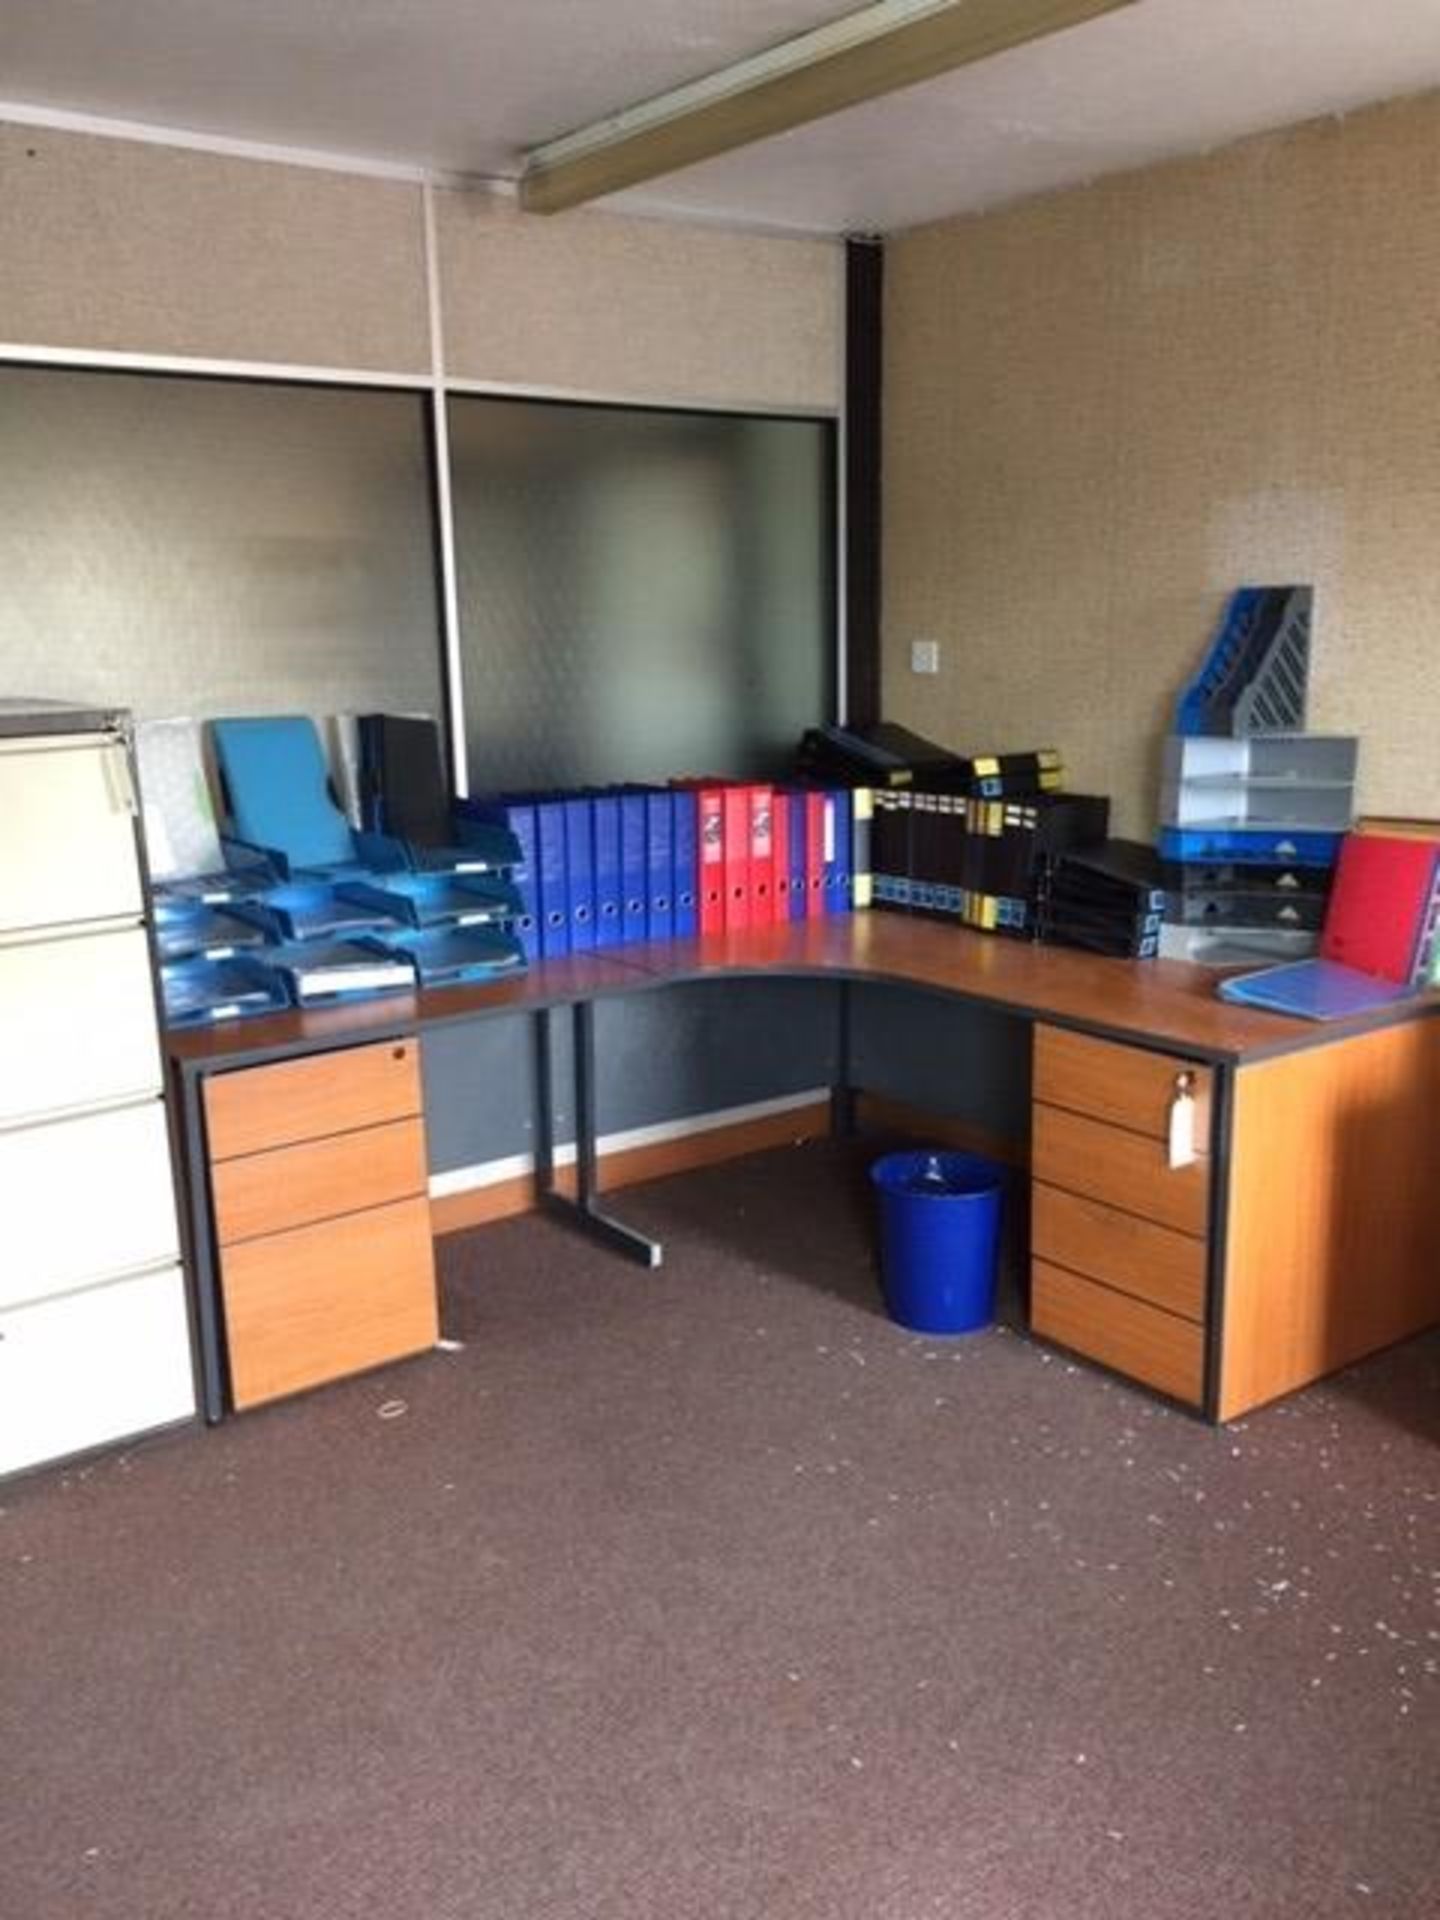 Contents of Office - Image 2 of 4